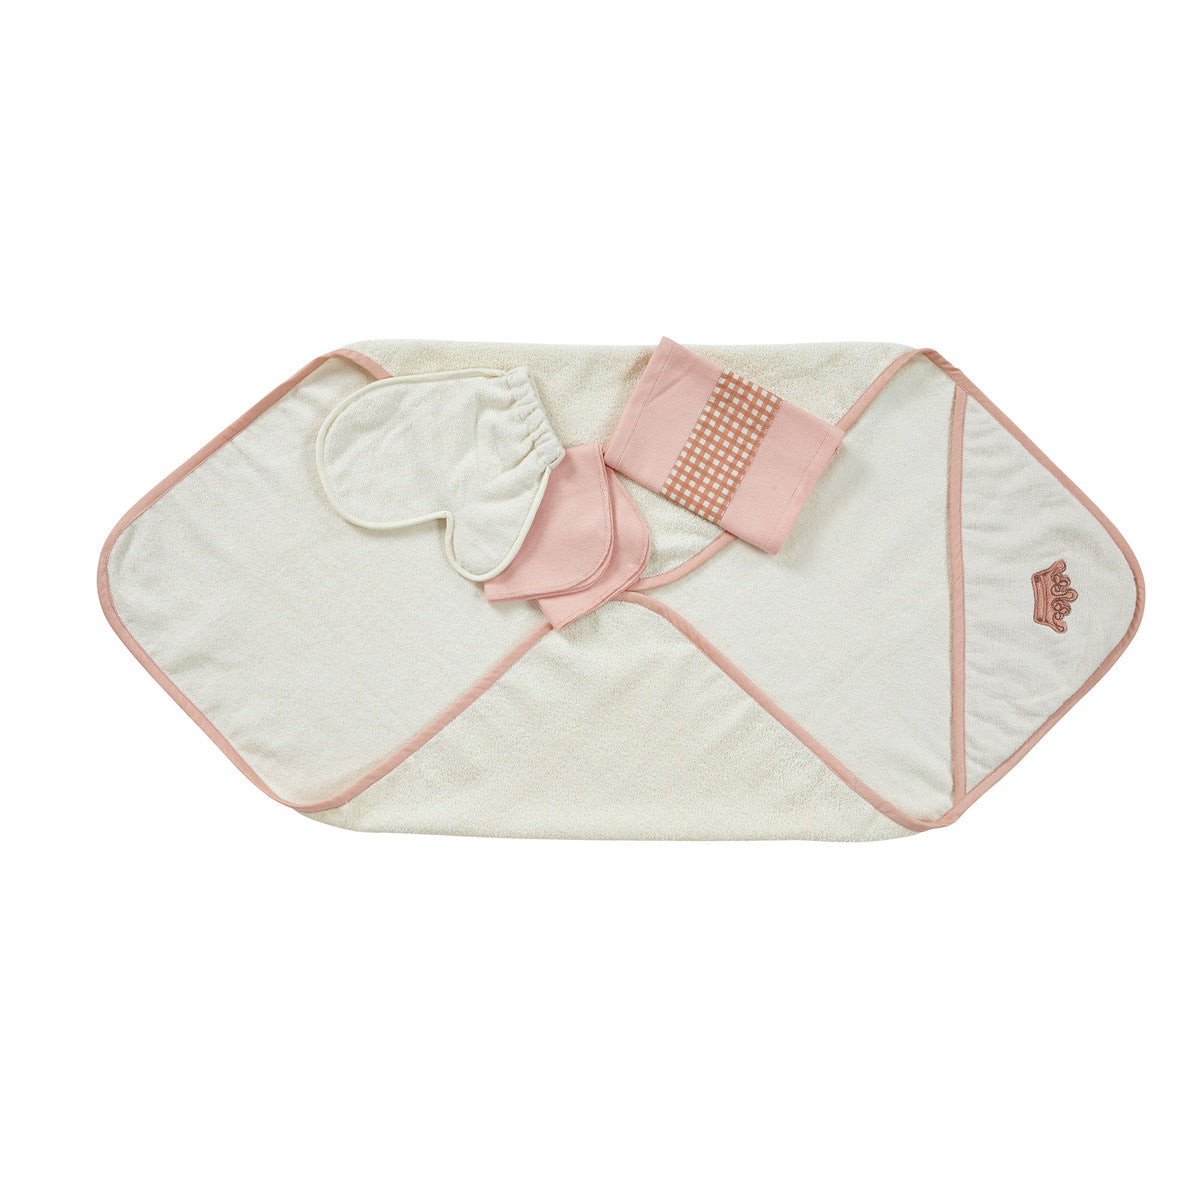 Ballerina Crown Embroidery Infant Antimicrobial Antifungal Super Absorbent &amp; Soft Peach Towel Set